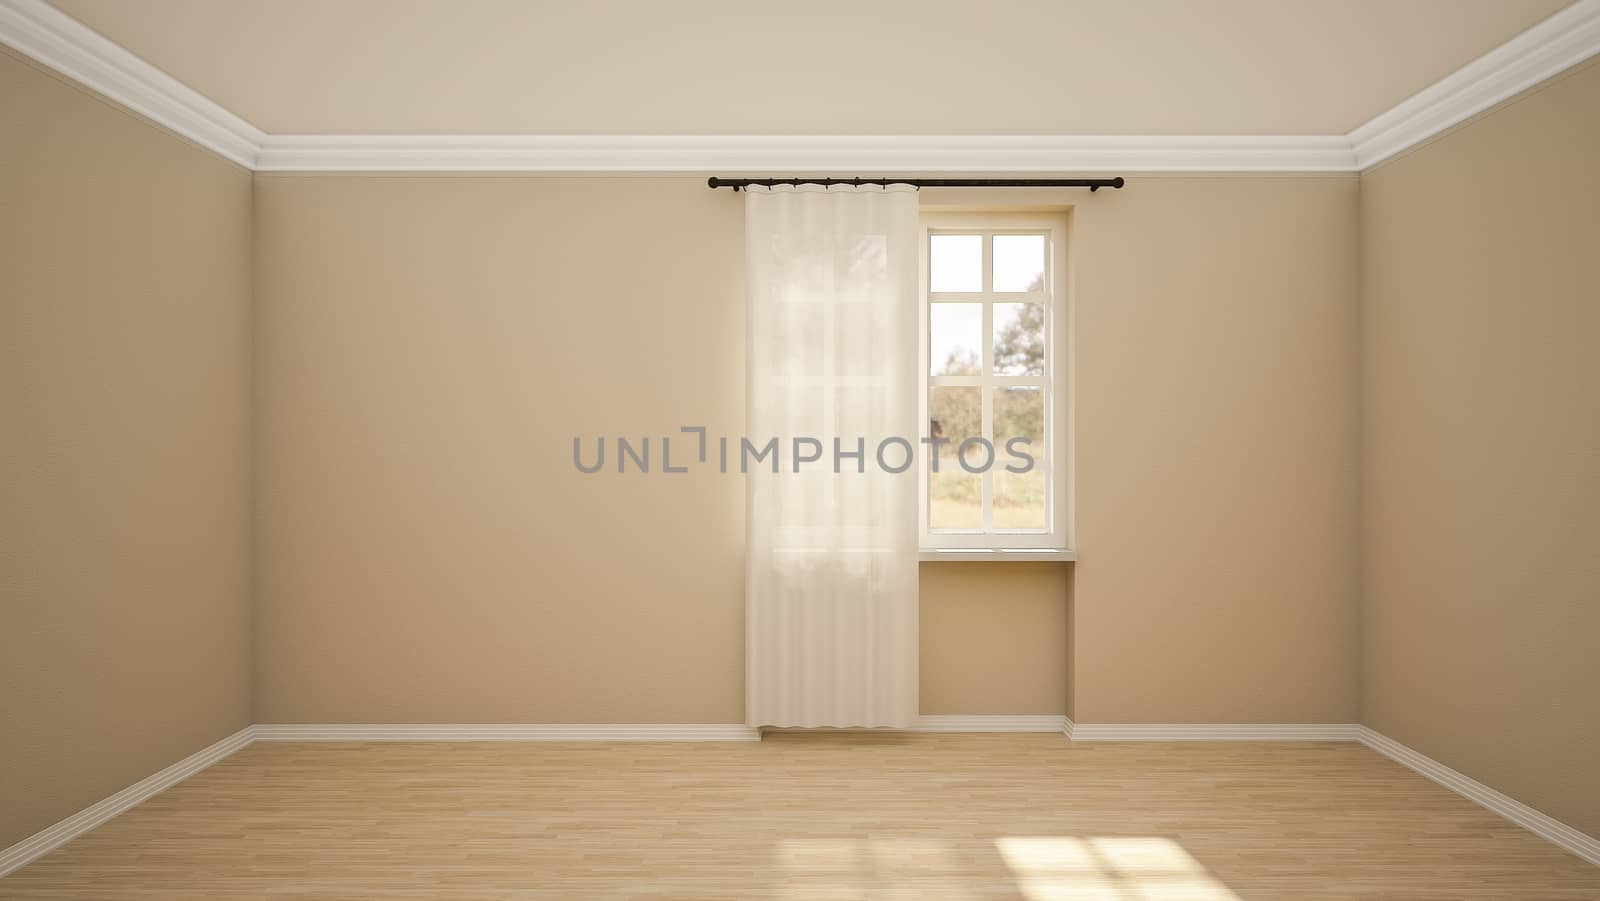 The interior design of empty room and living room modern style with window and wooden floor. 3d Render